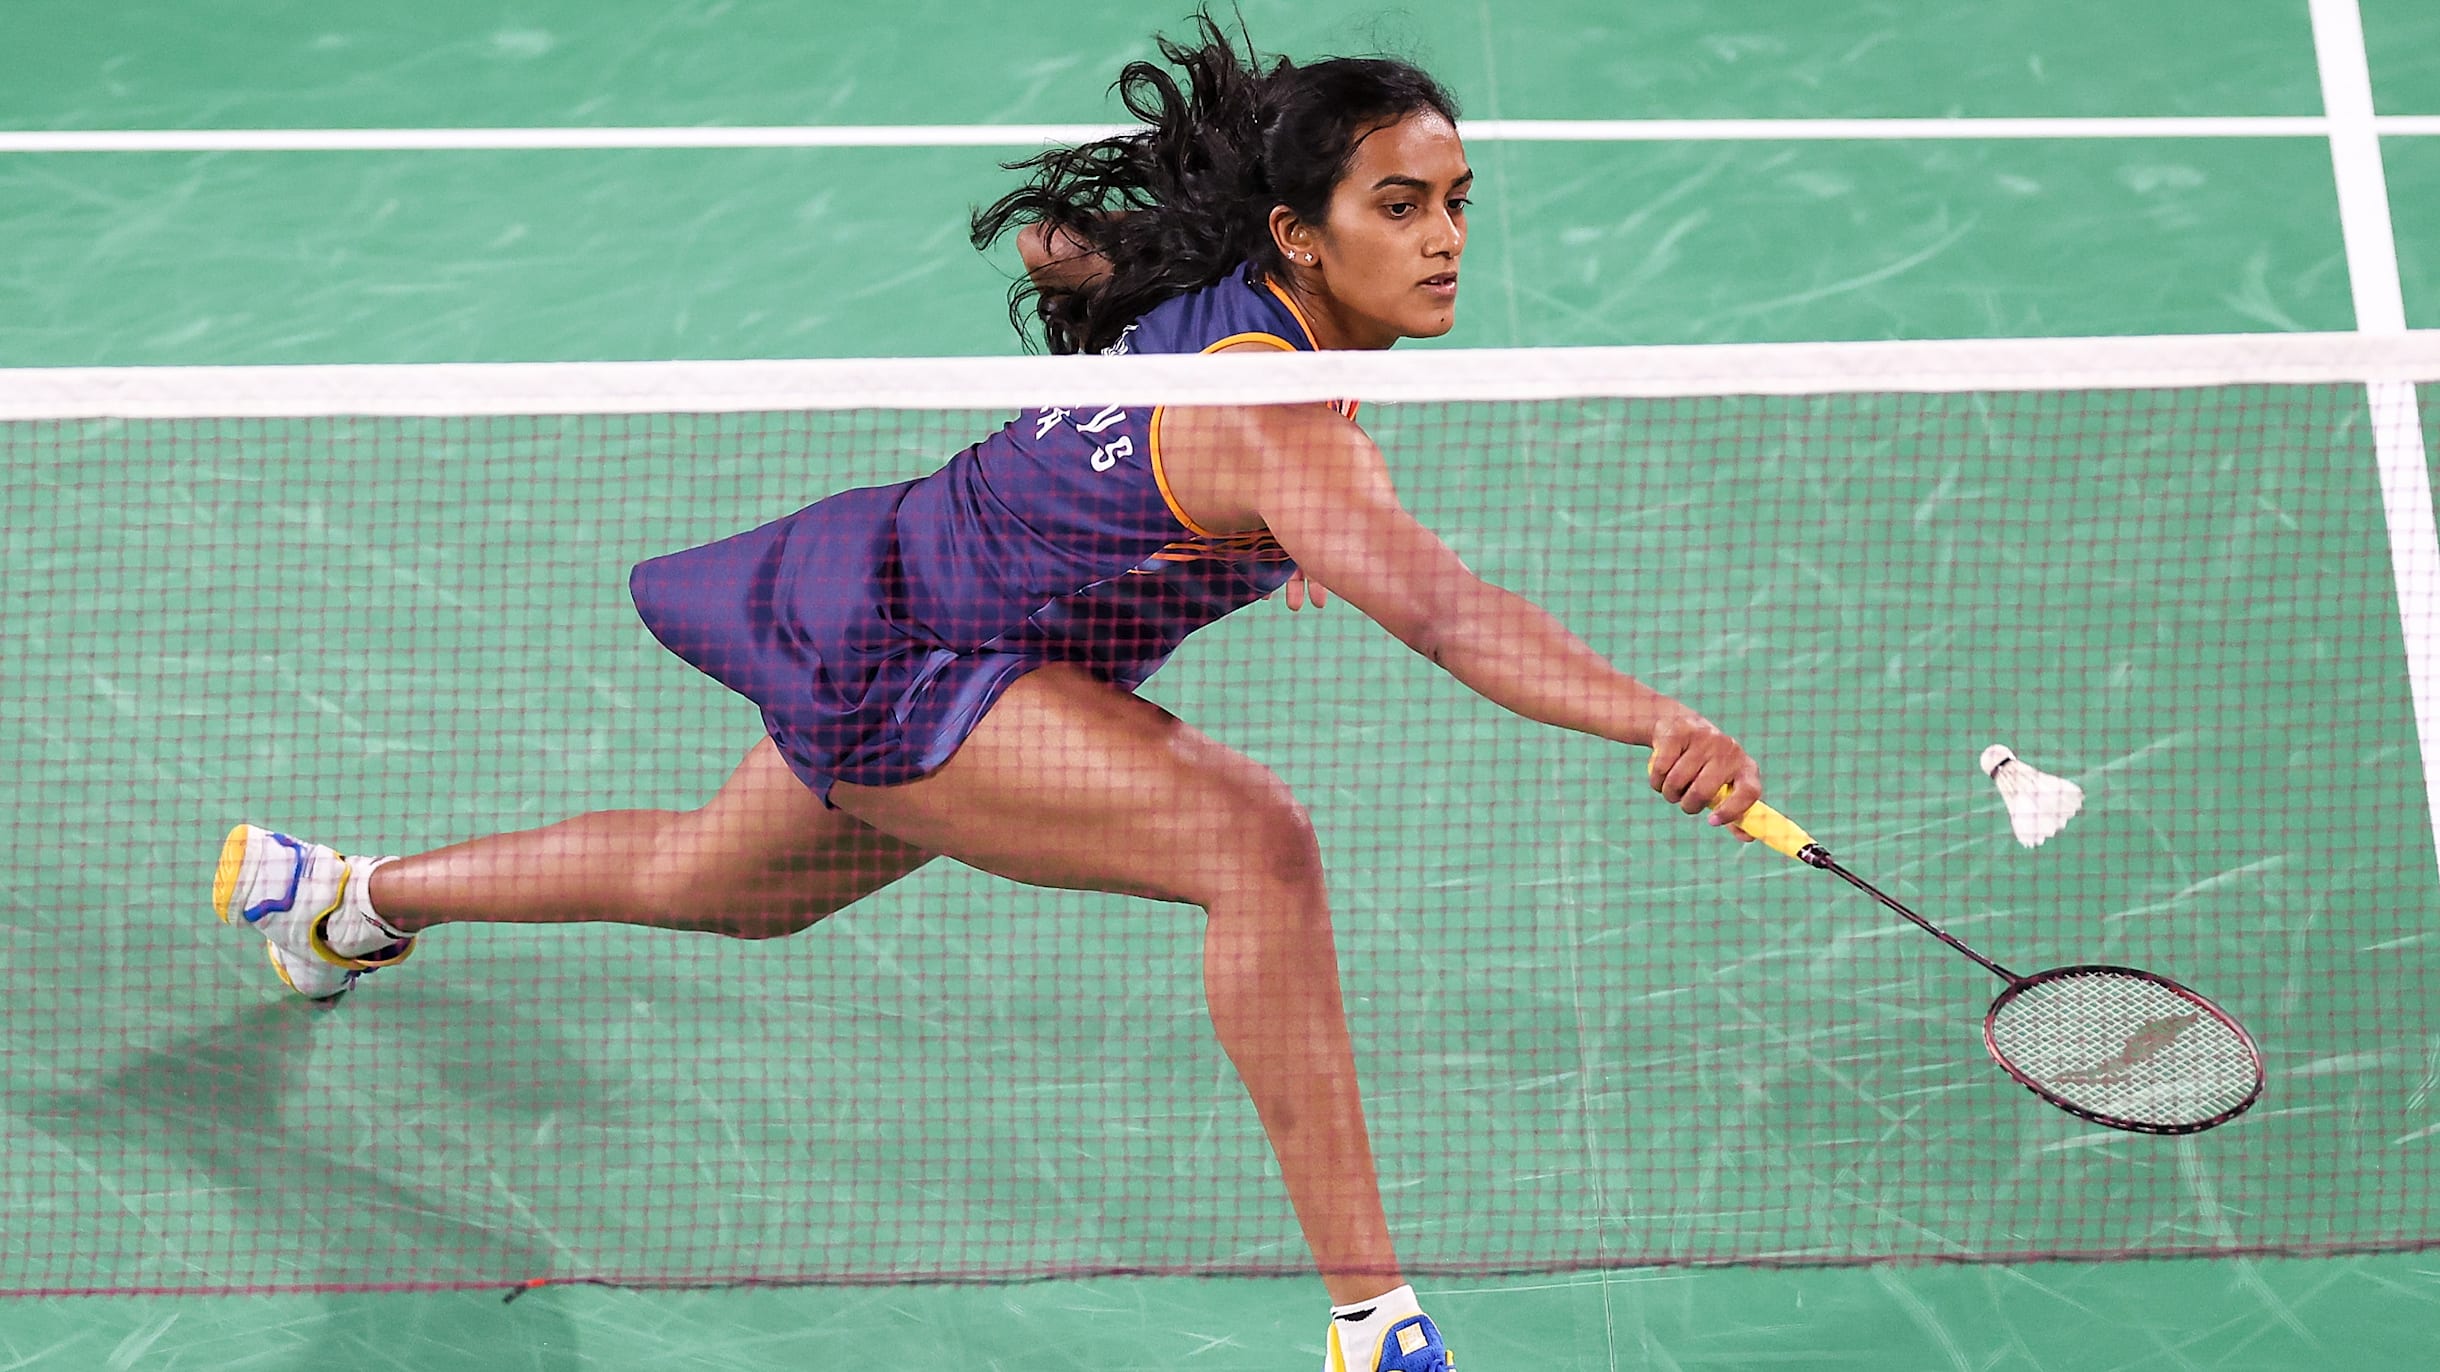 Thailand Open badminton 2022 Watch live streaming and telecast in India